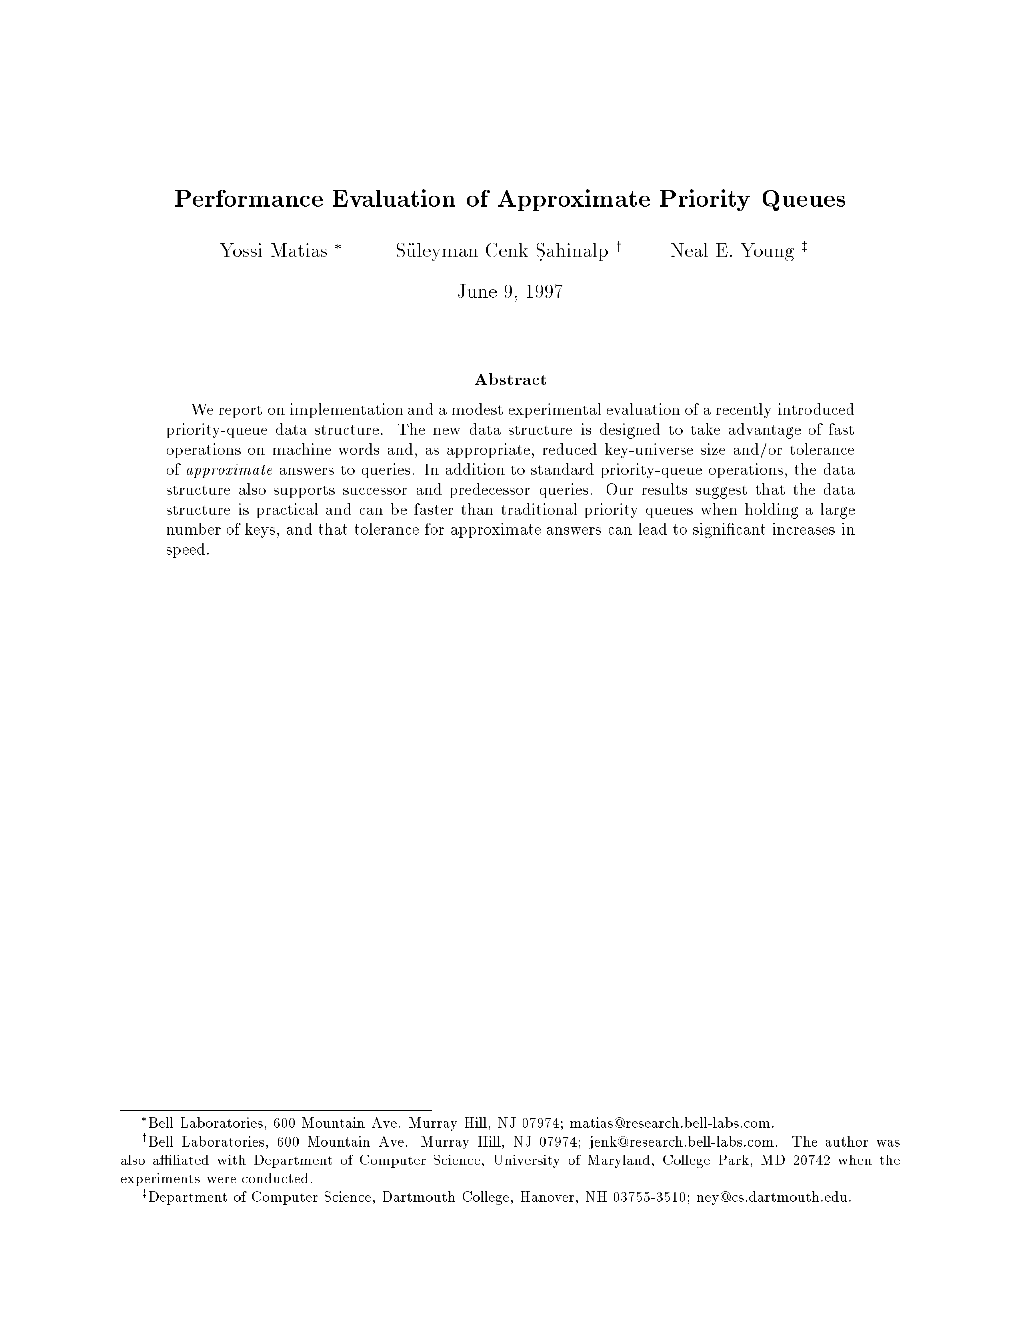 Performance Evaluation of Approximate Priority Queues